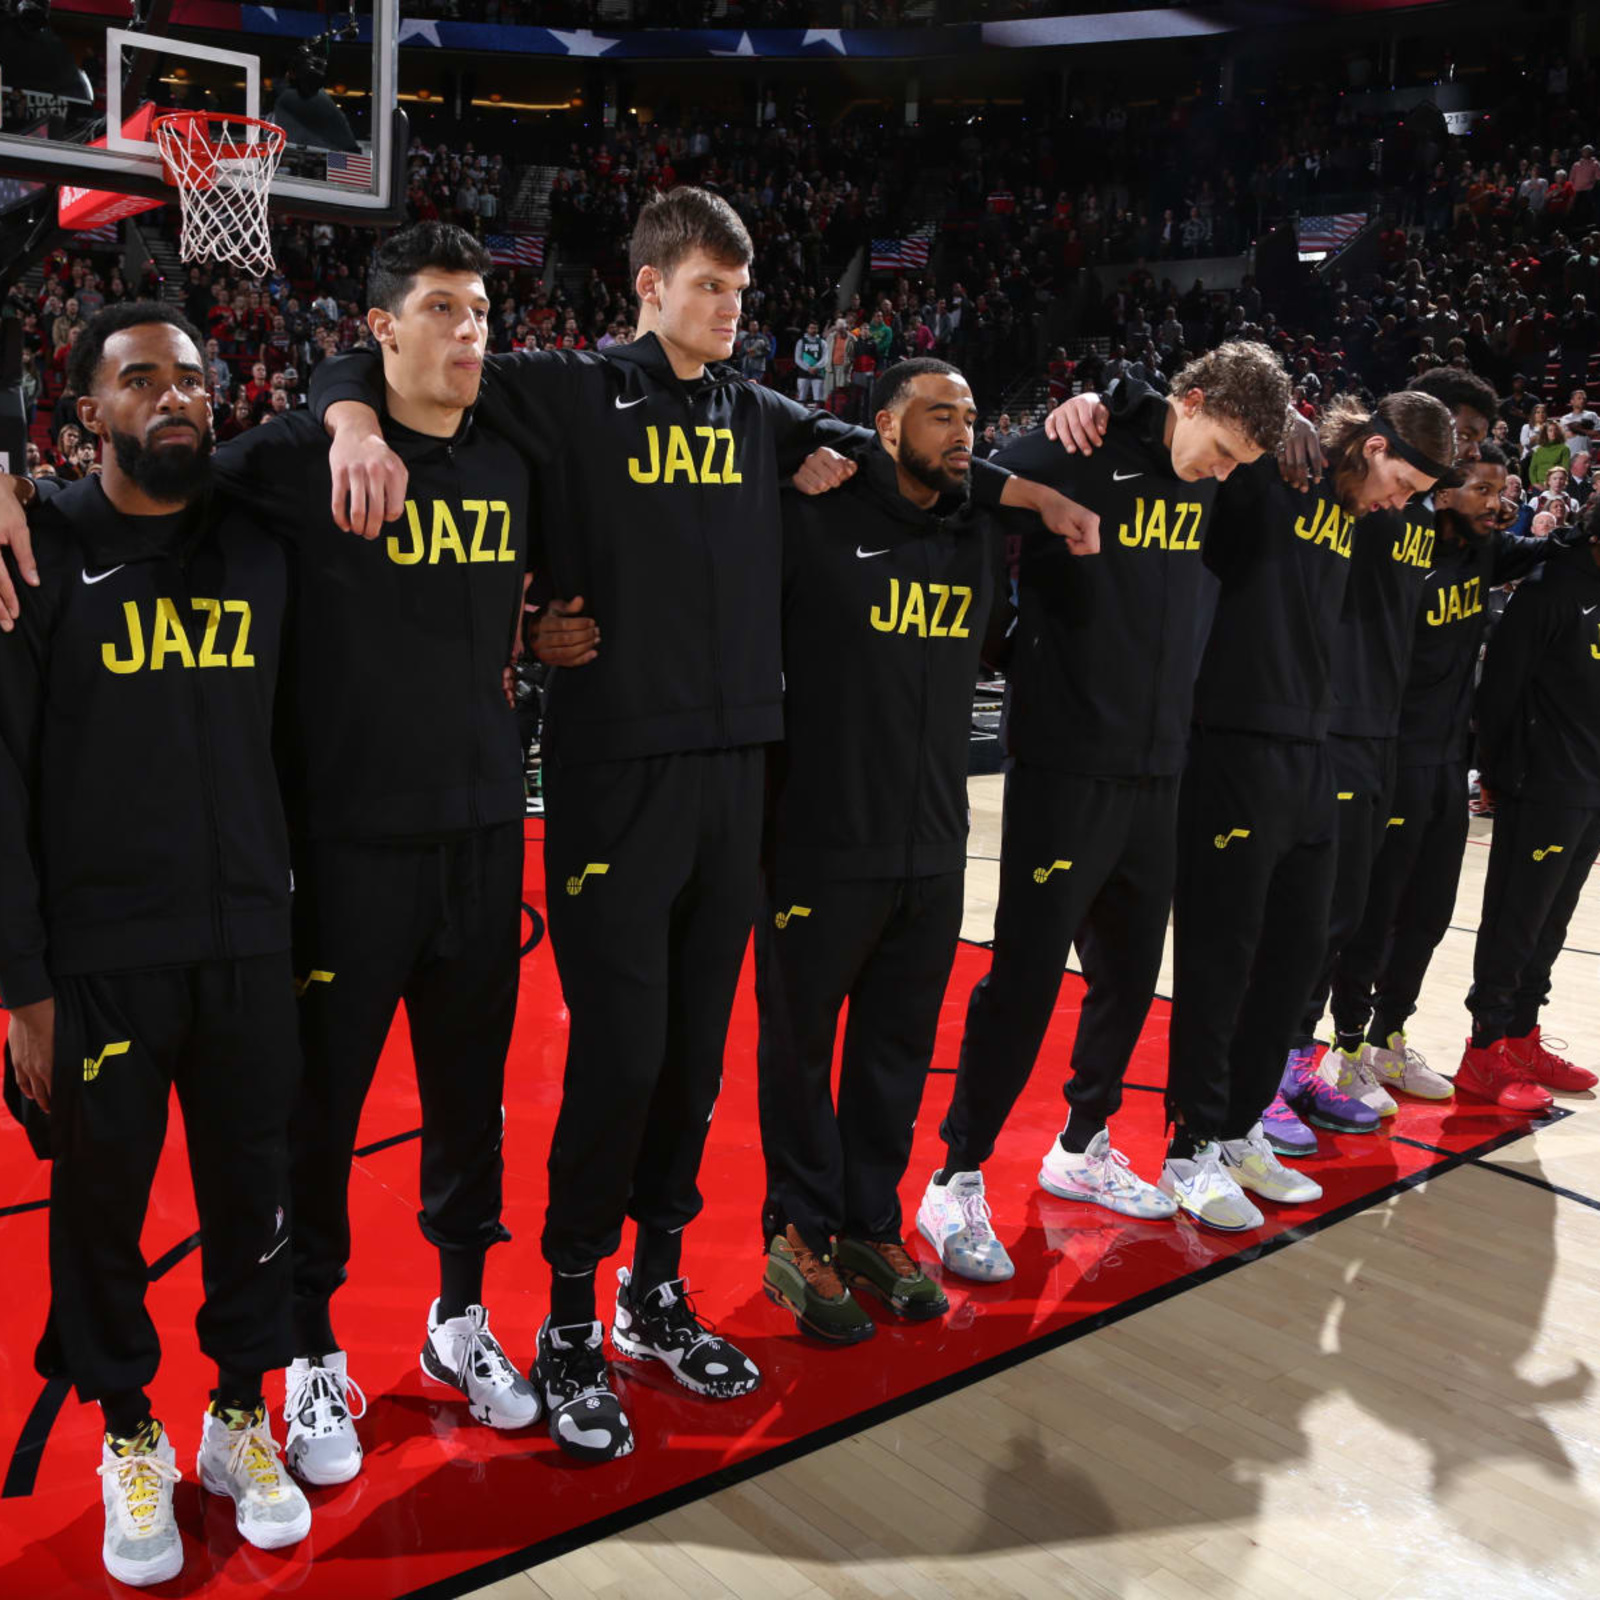 The NBA Just Banned Off-White Uniforms for the Most Annoying Reason